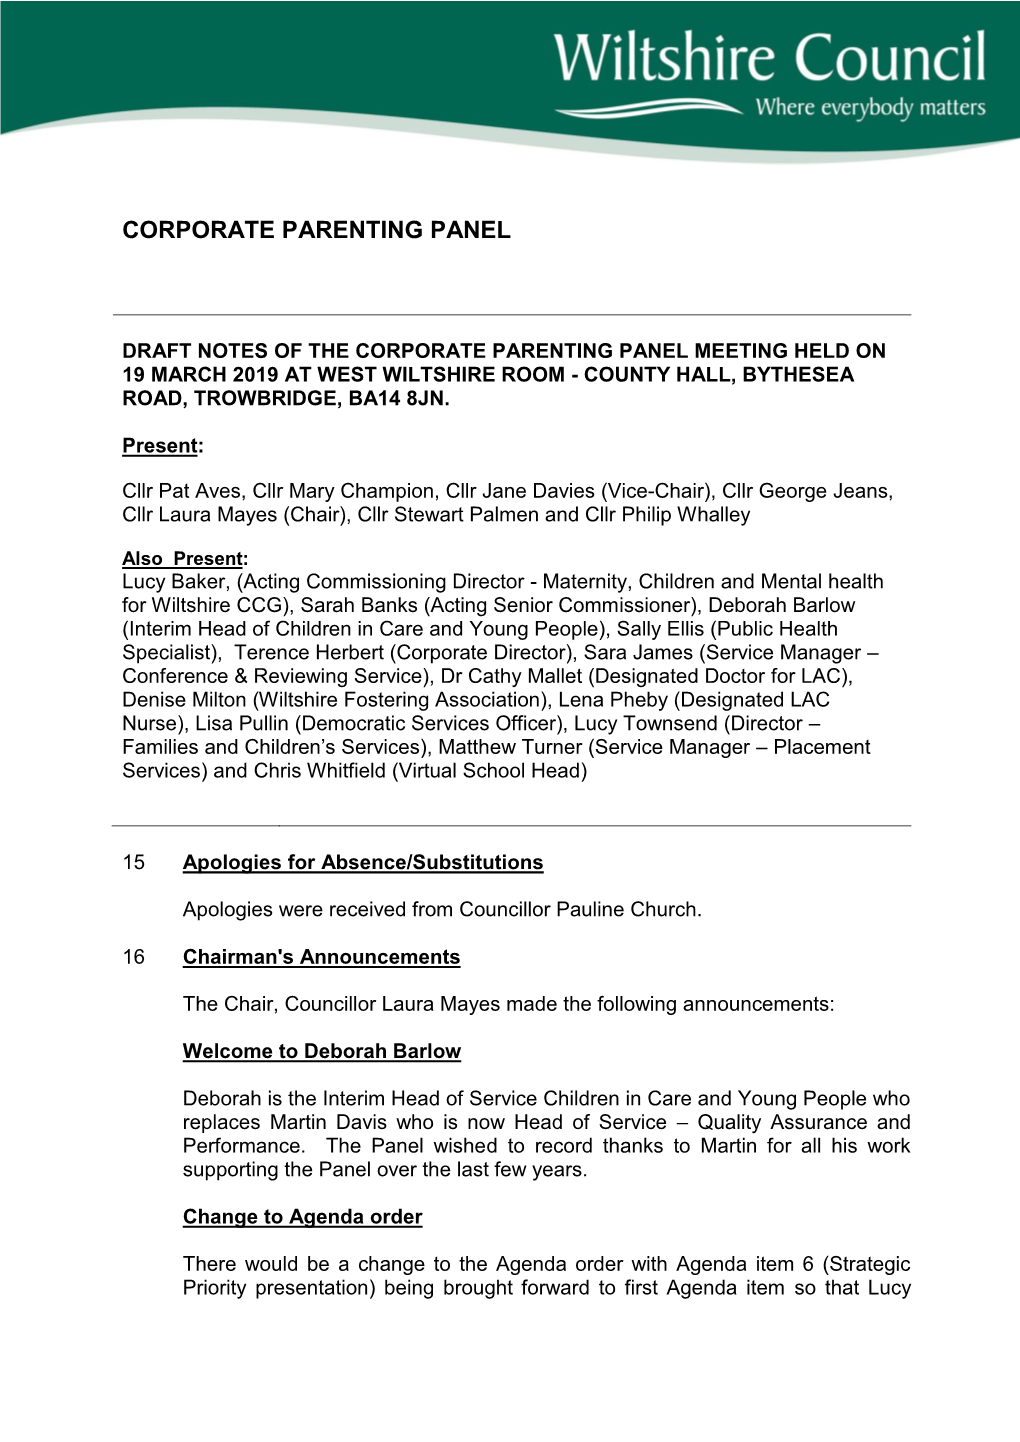 (Private Pack)Minutes Document for Corporate Parenting Panel, 19/03